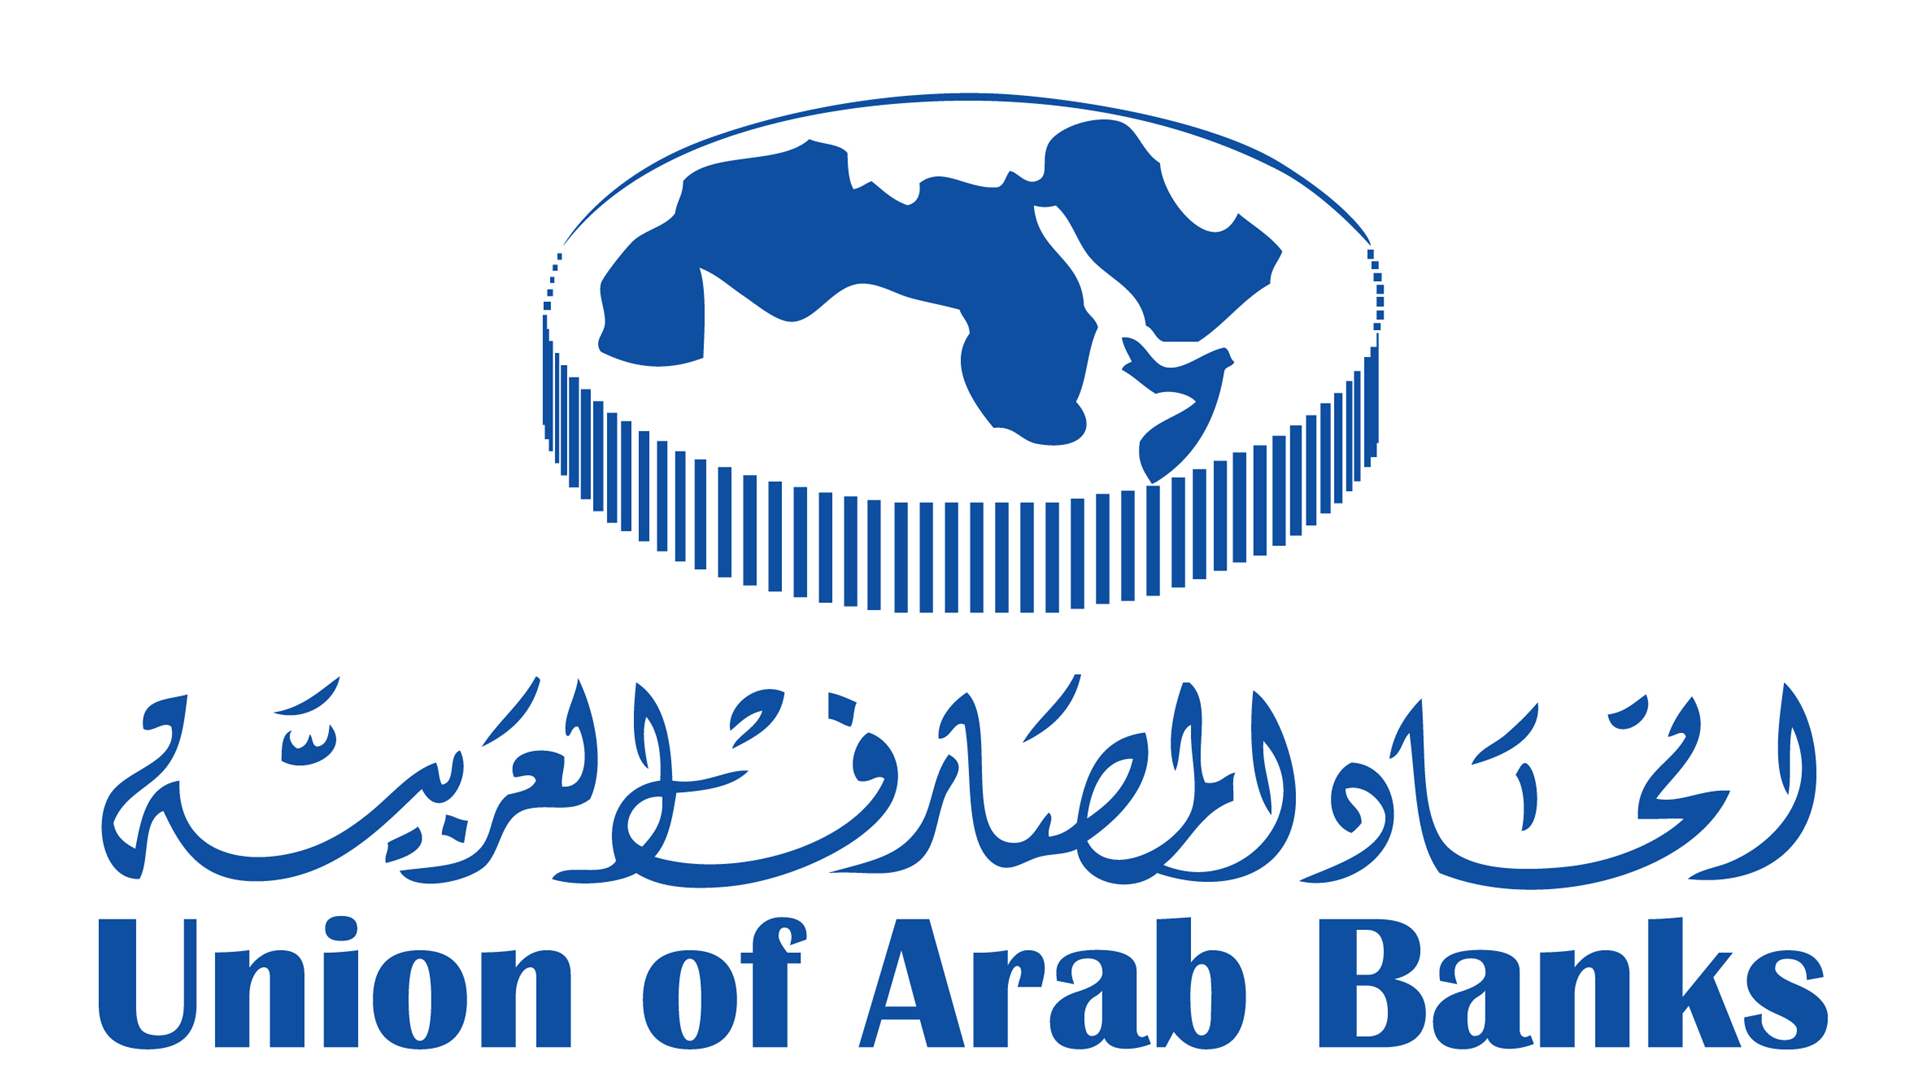 Union of Arab Banks submits plan to government for industry-wide reform